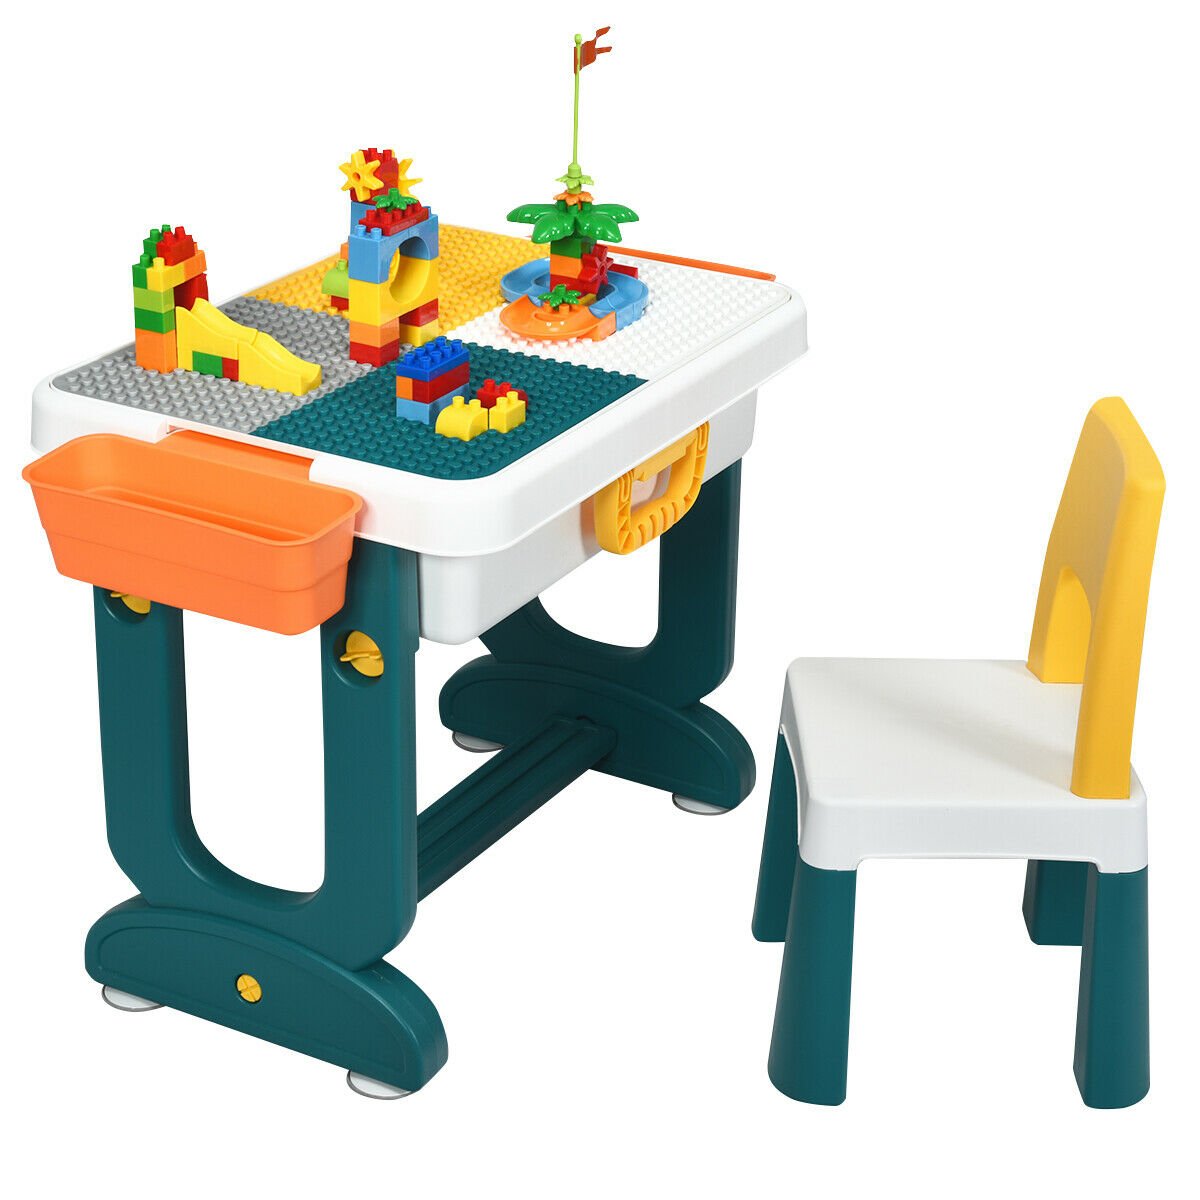 5 In 1 Kids Activity Table Set W/ Chair Toddler Luggage Building Block Table